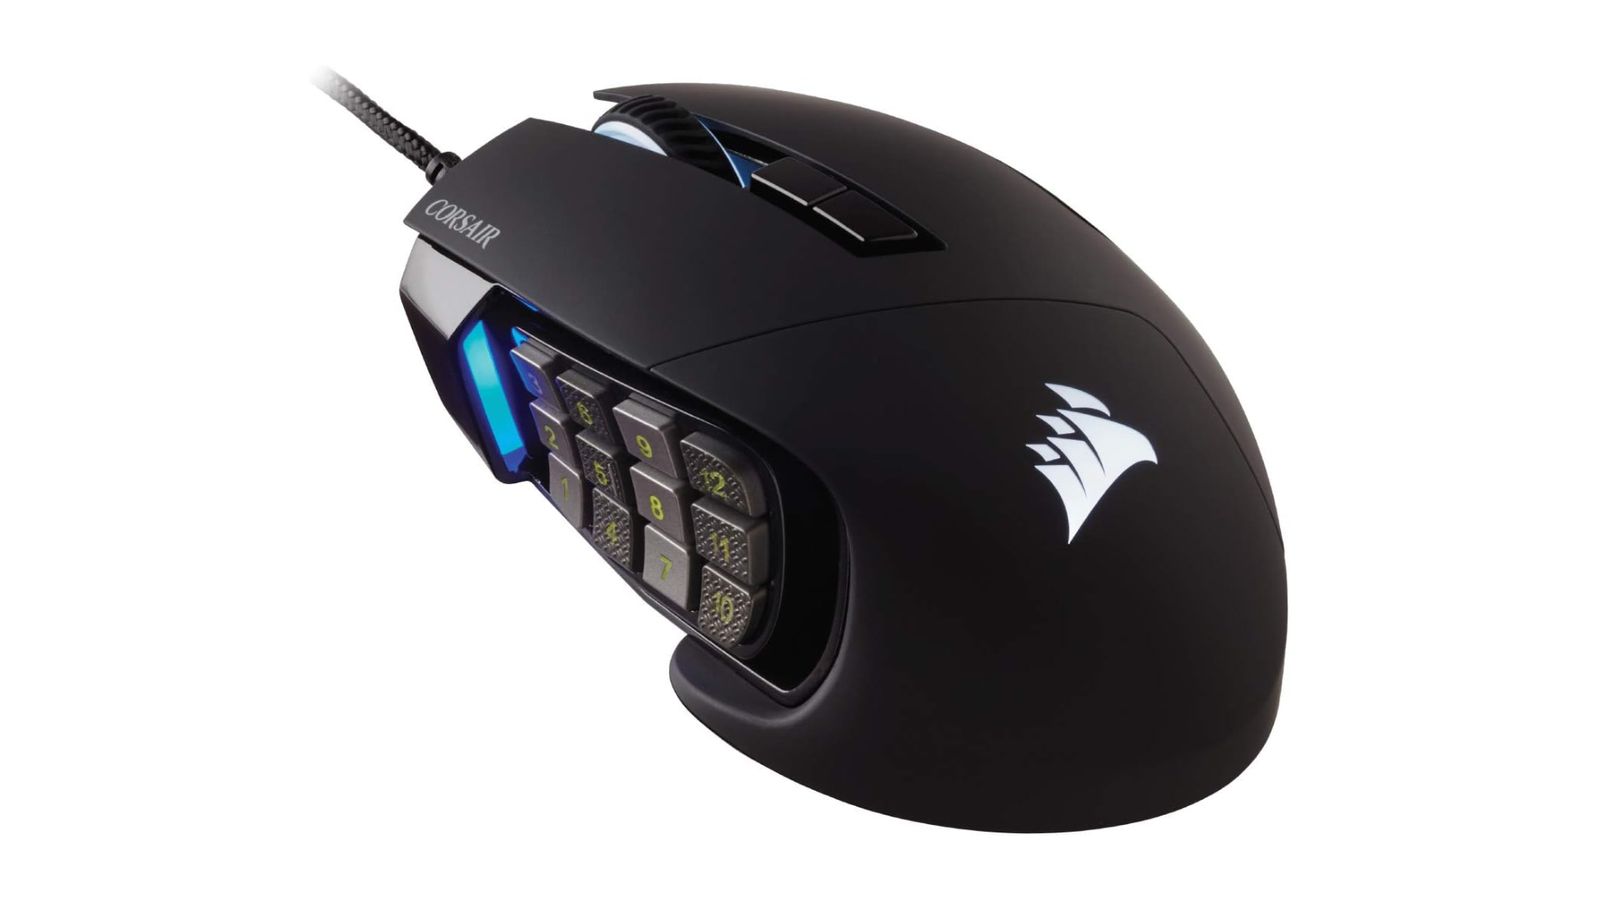 Corsair Scimitar RGB Elite product image of a black mouse featuring a white Corsair logo, blue lighting, and a number pad down the side.